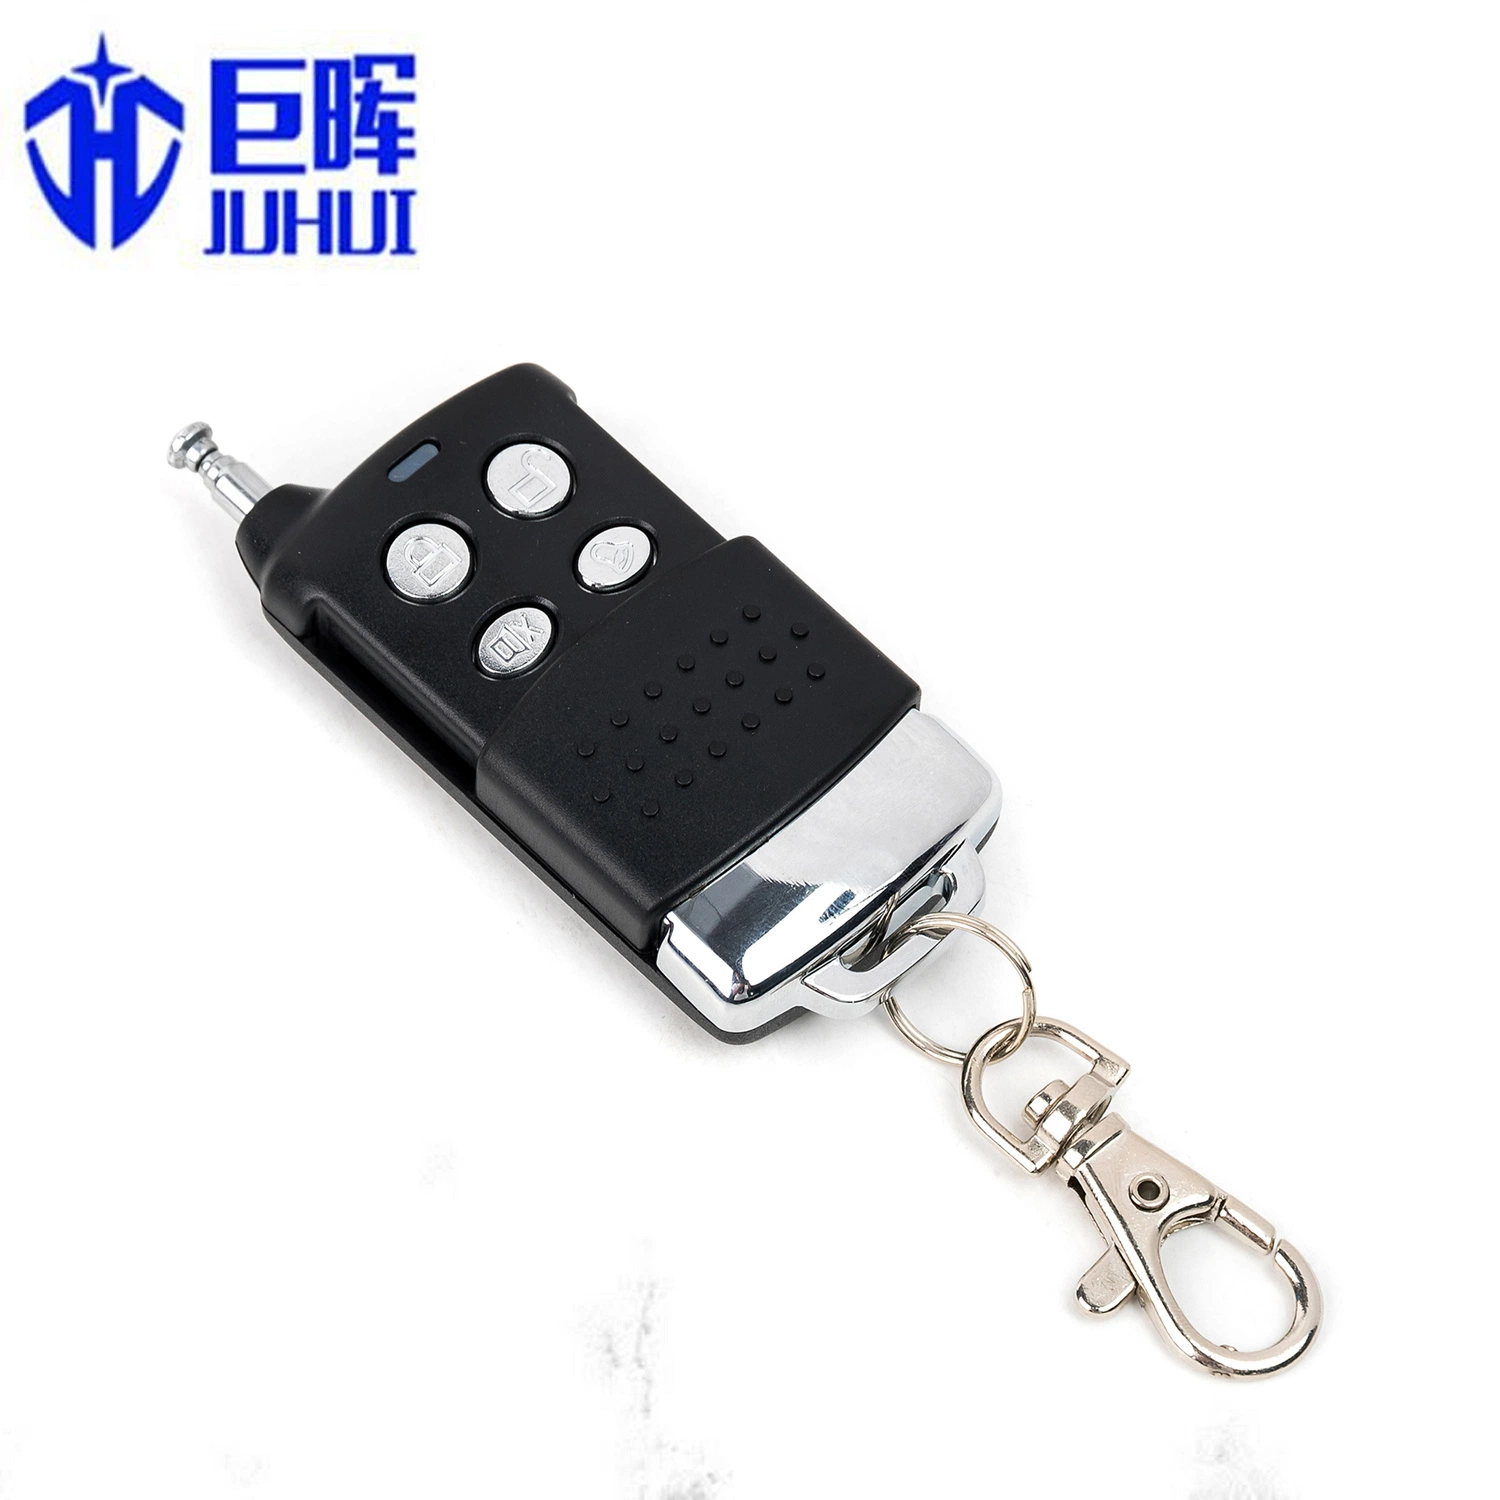 Steelmate Universal Remote Control for Gates Roller Shutter